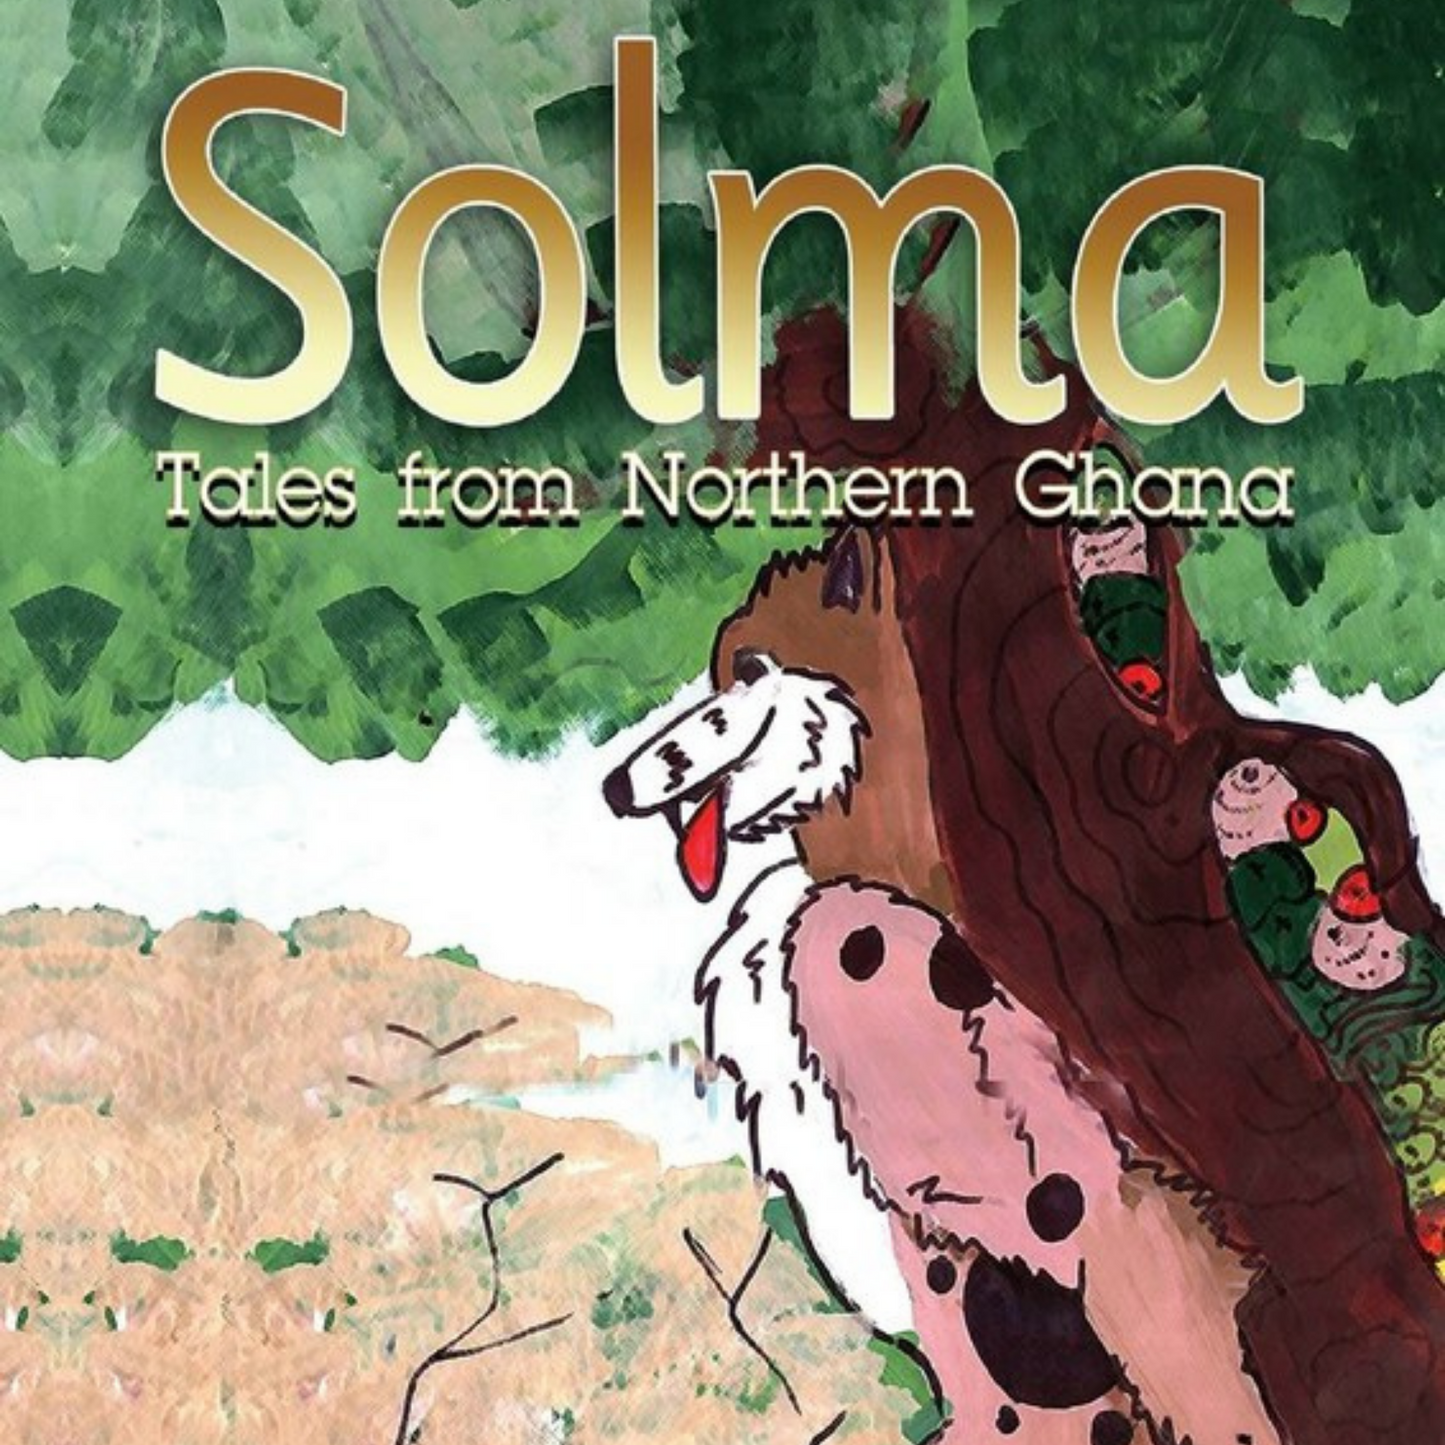 Solma: Tales from Northern Ghana